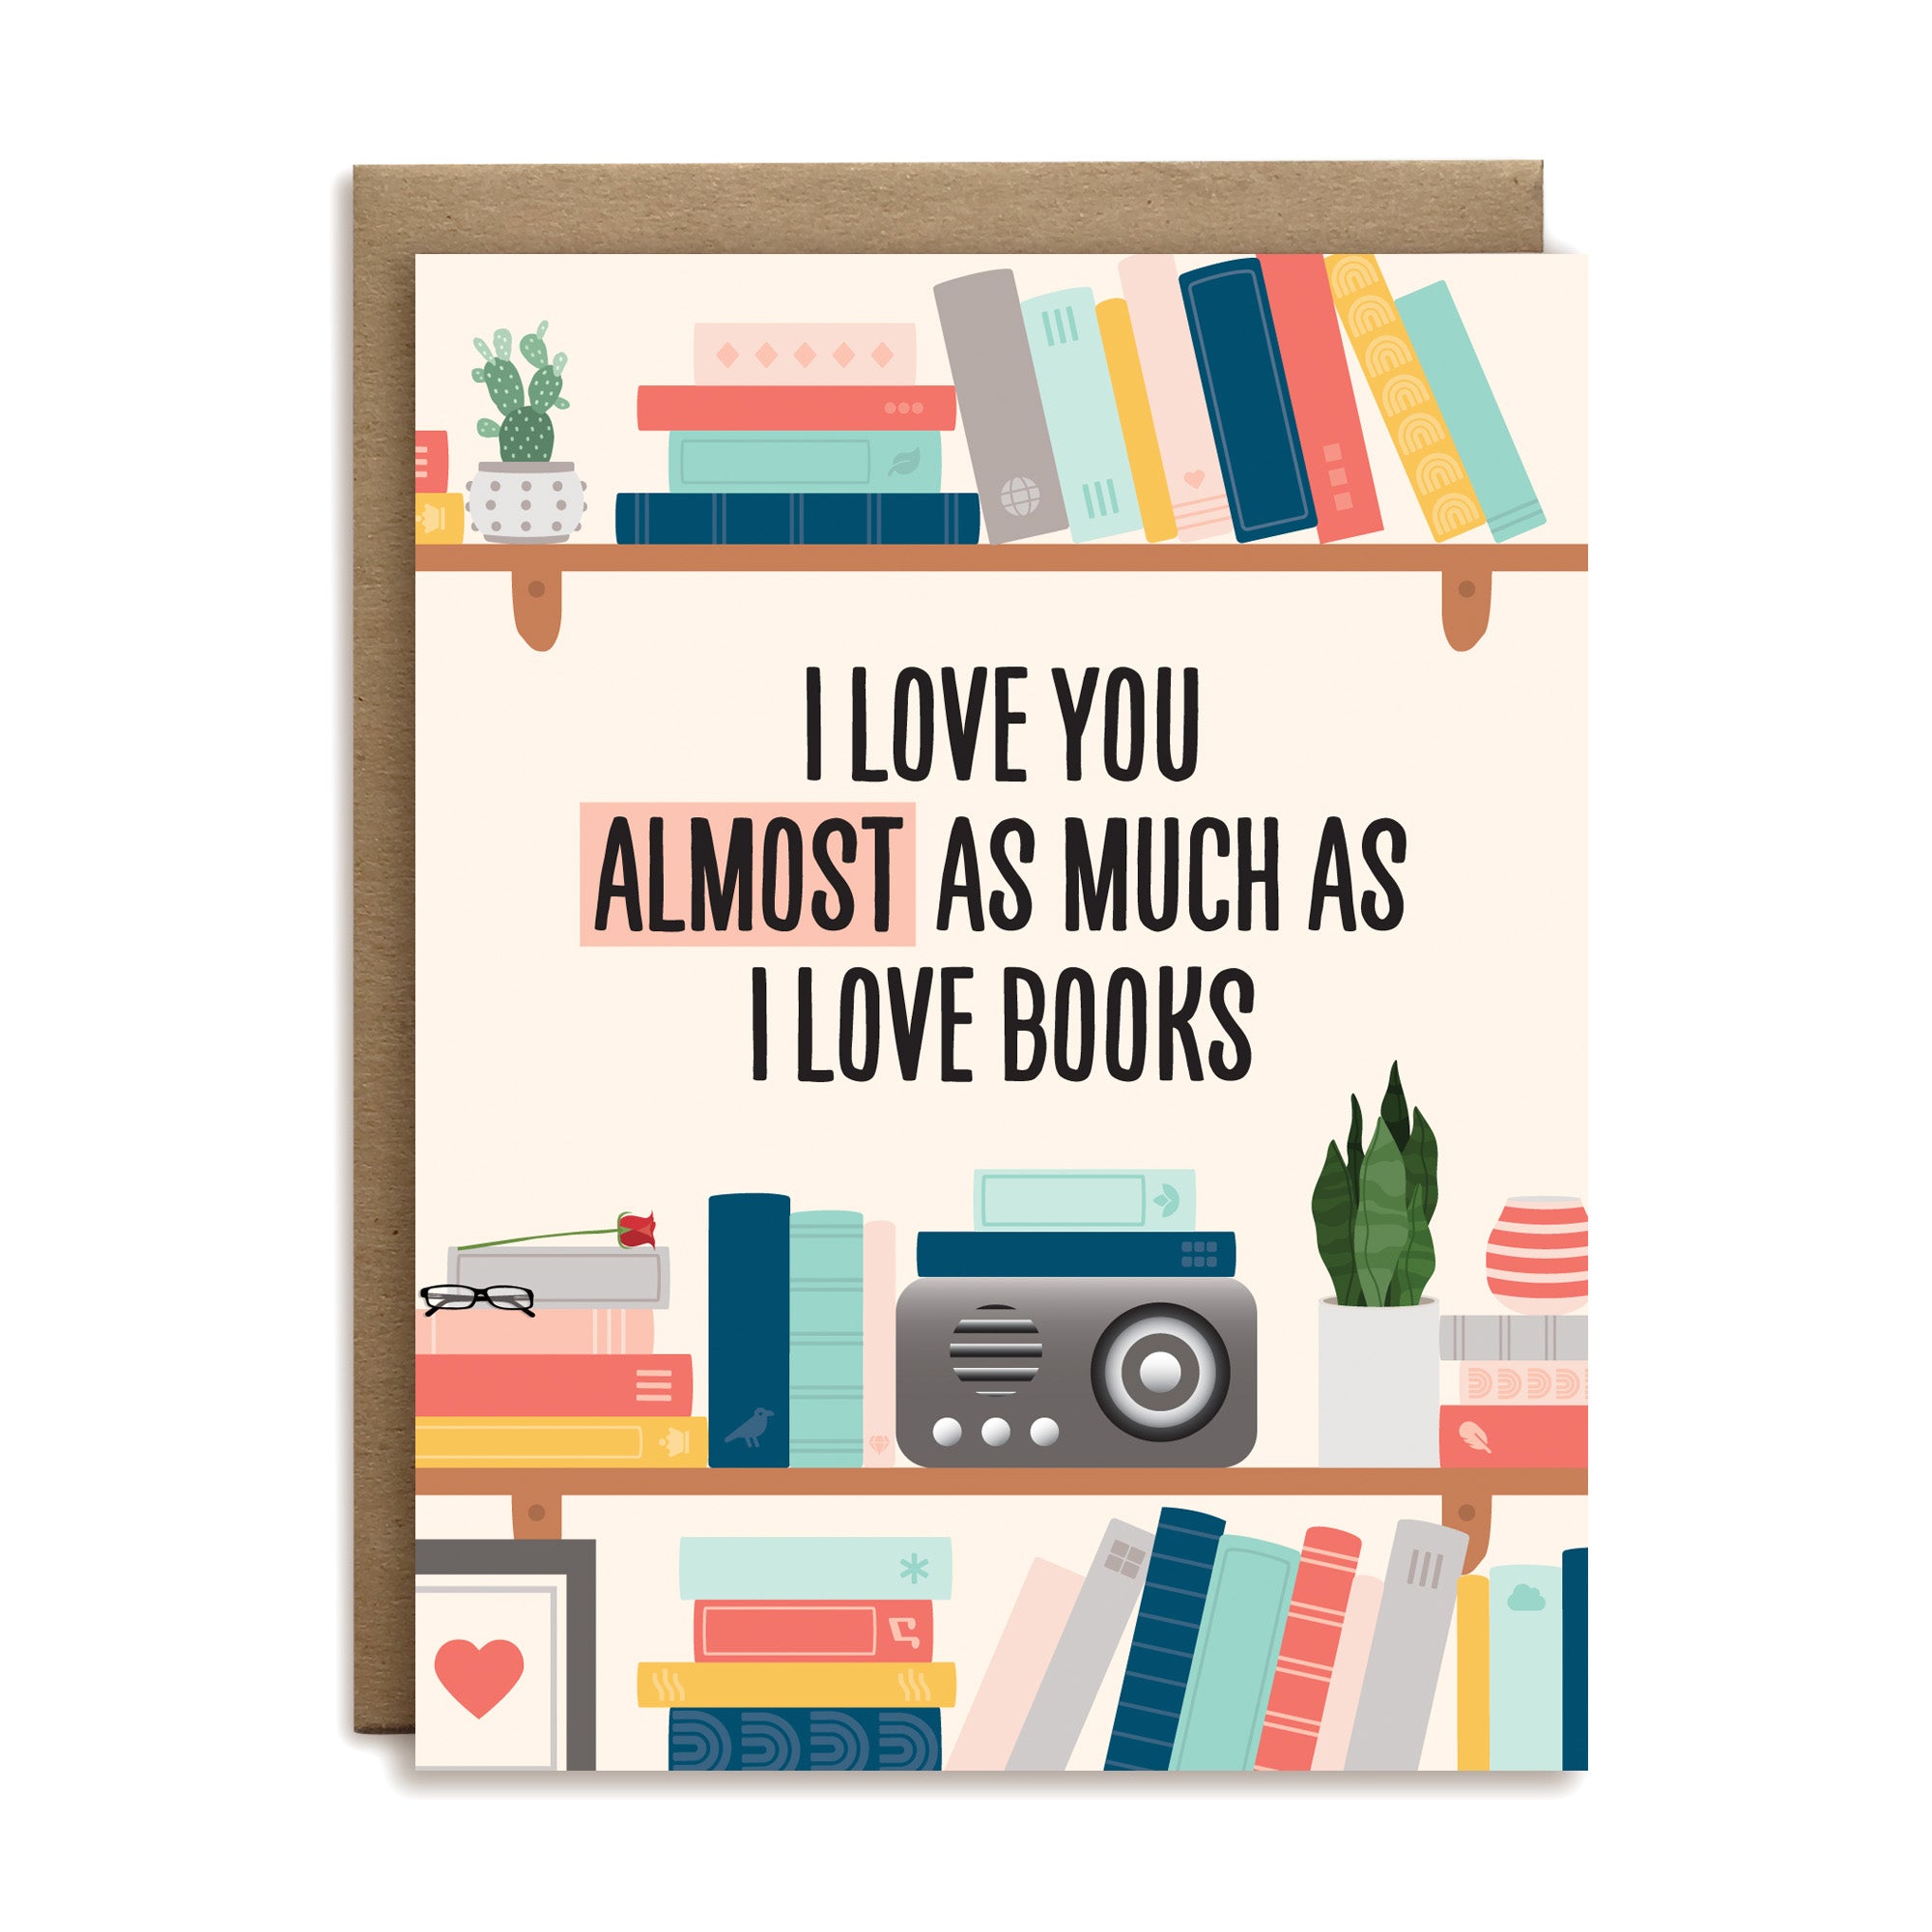 I love you almost as much as I love books greeting card by I&